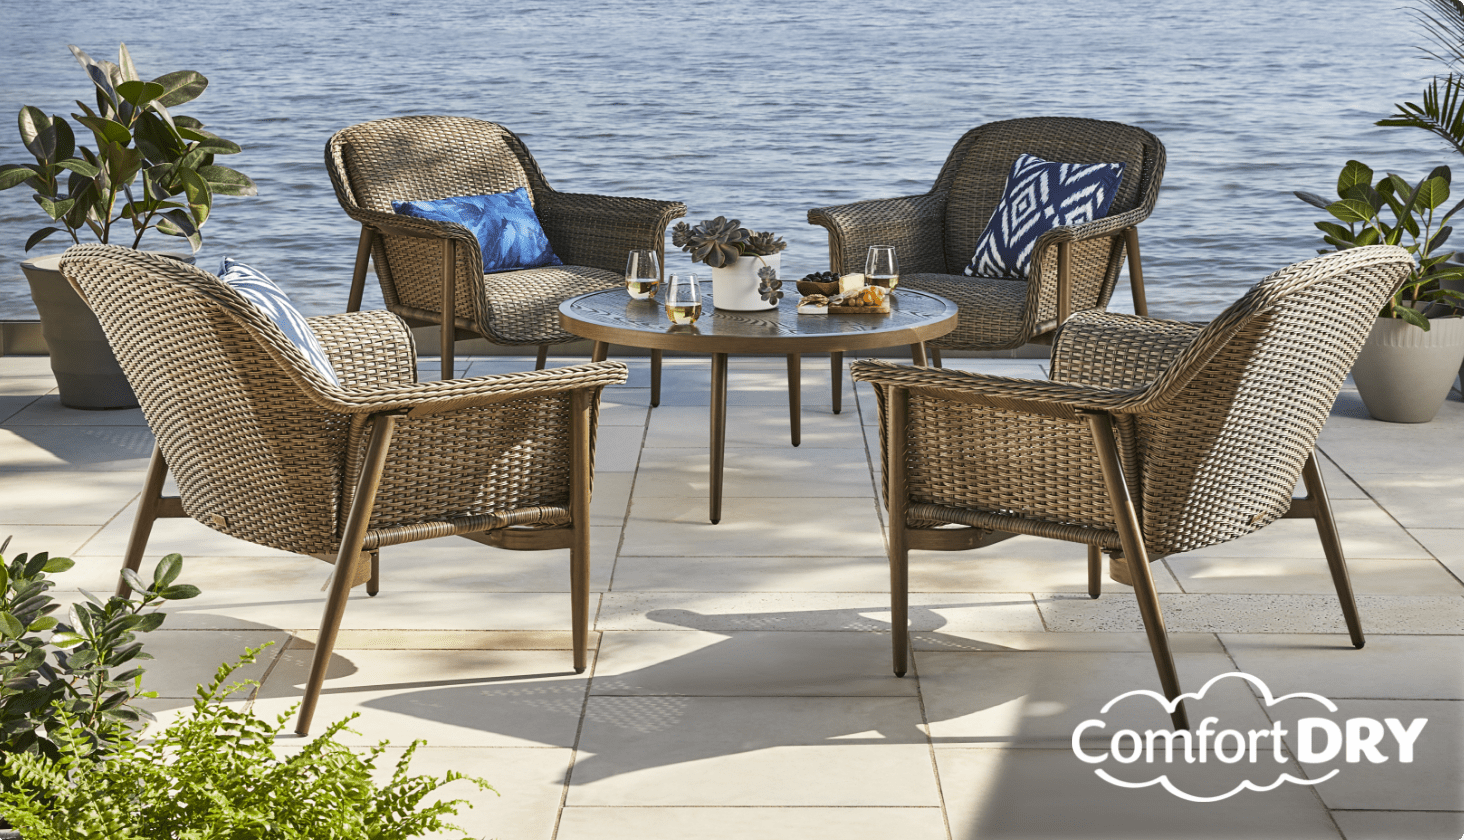 Four CANVAS Hunter Club Chairs and a round coffee table with beverages on a waterfront patio. 